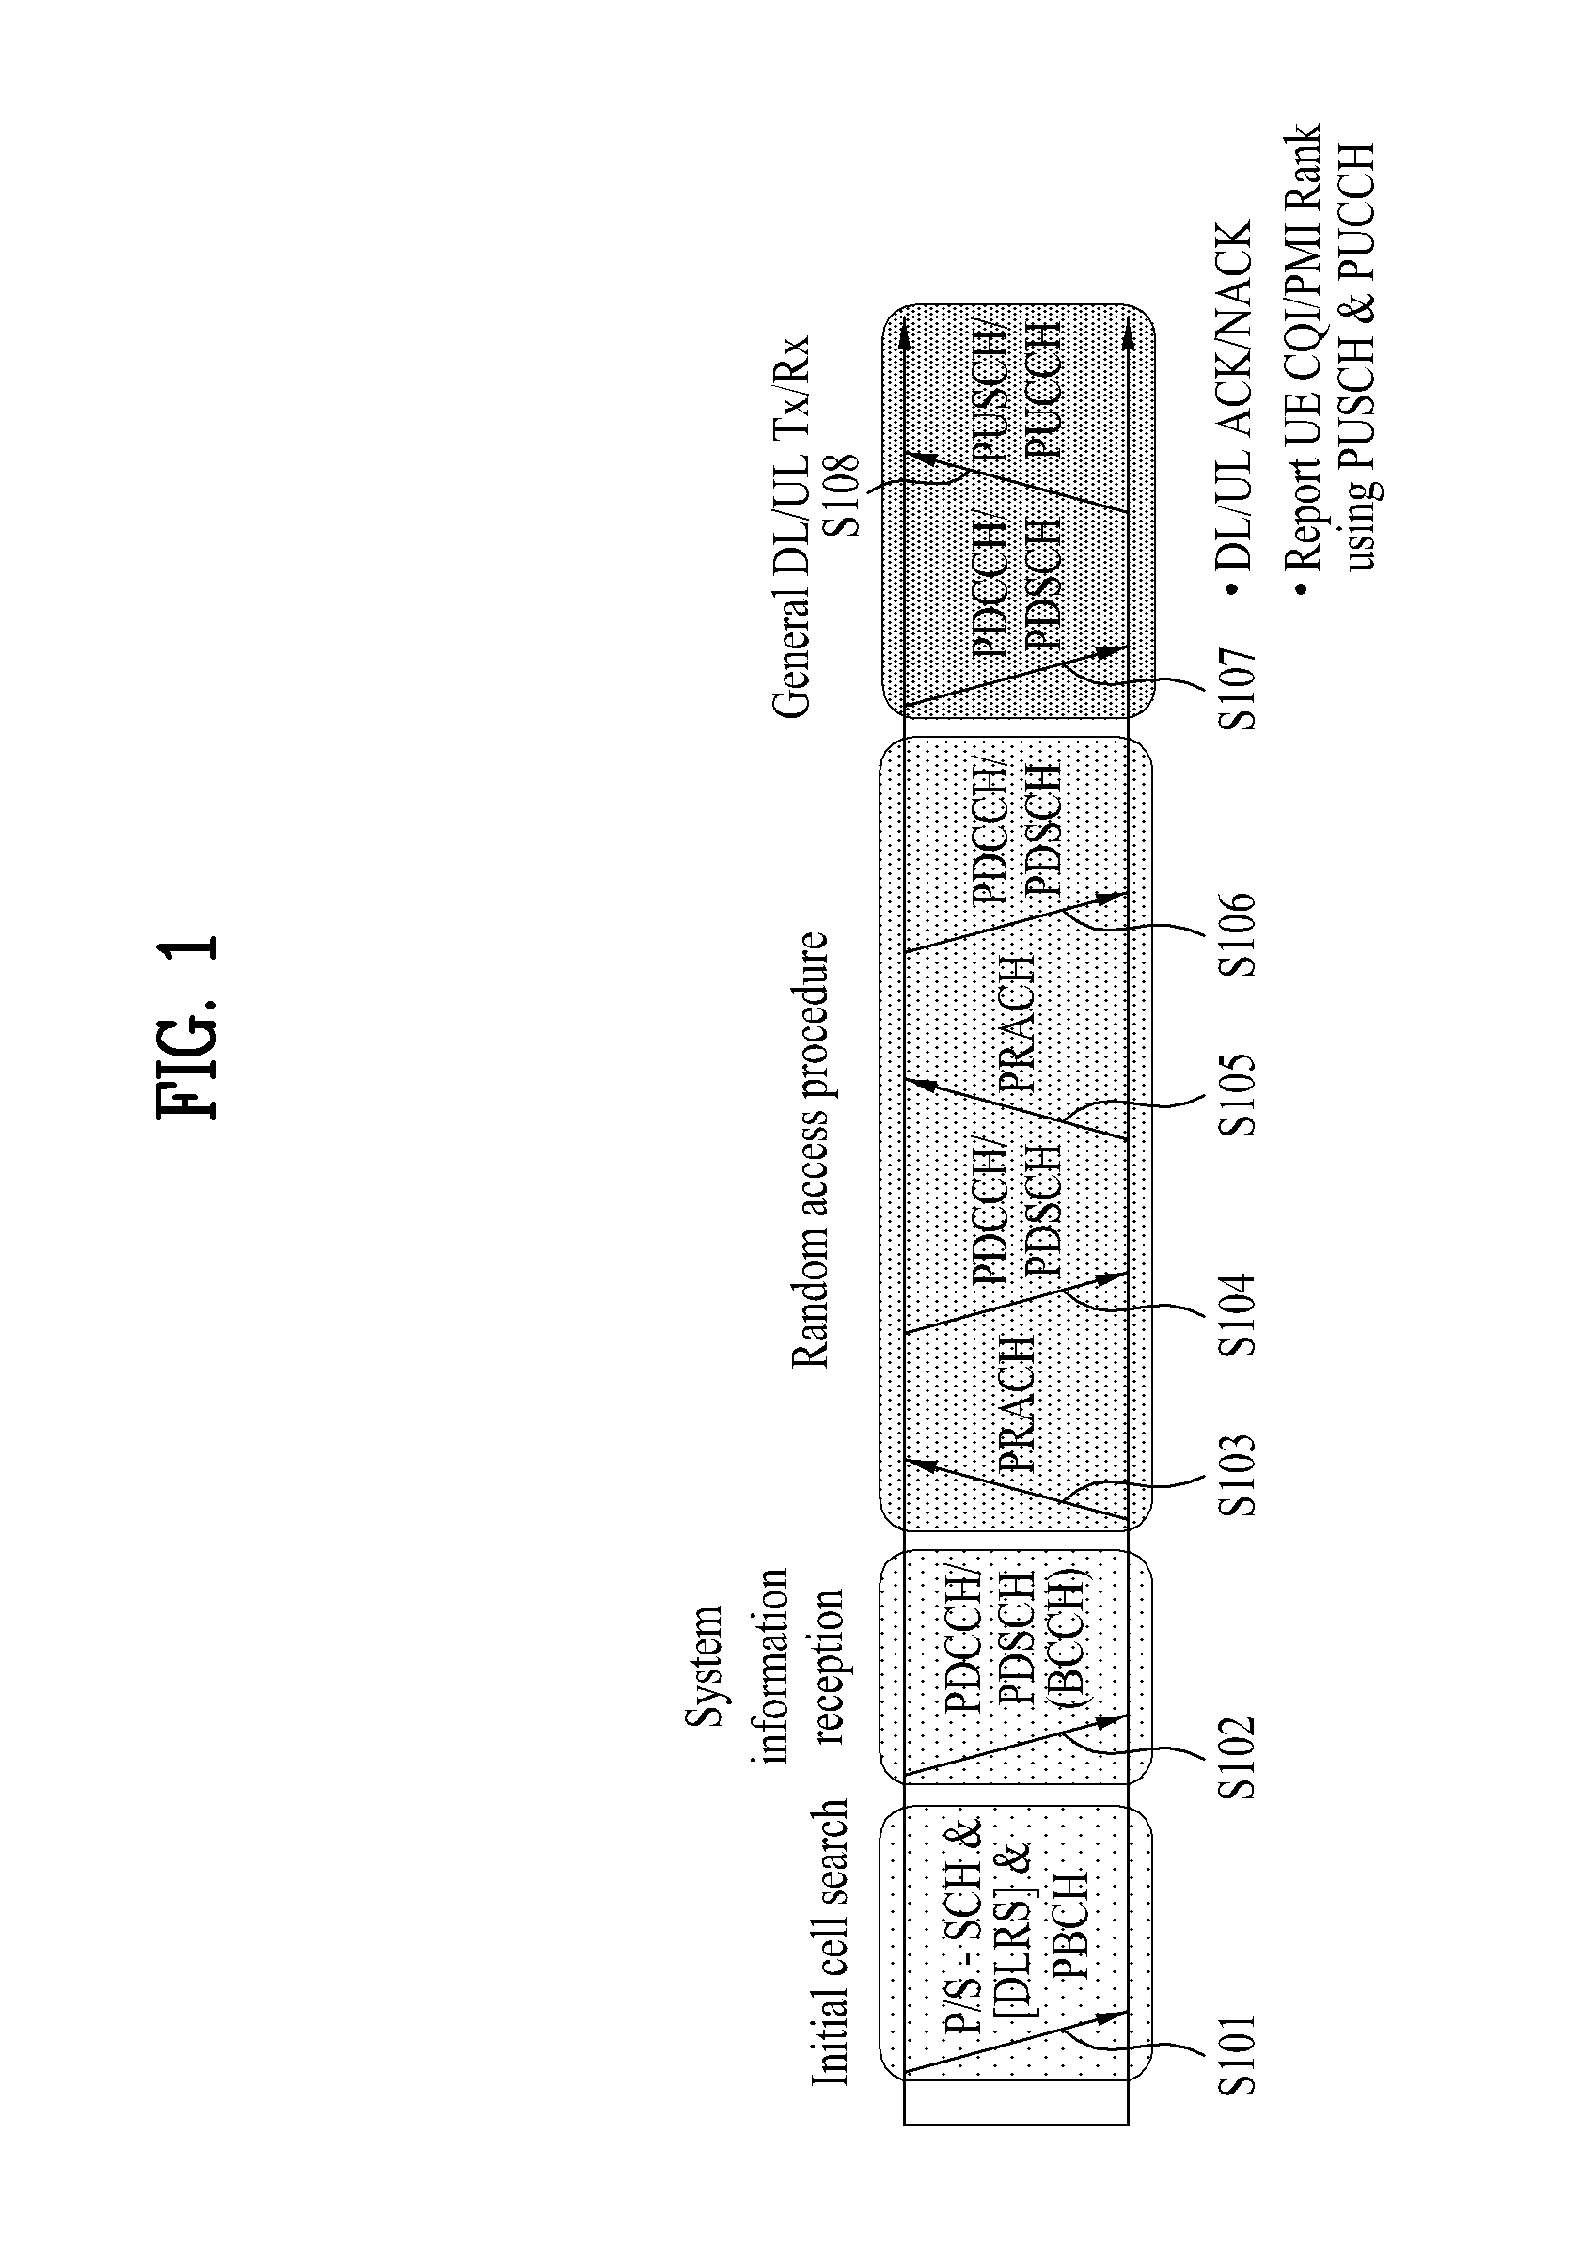 Method and apparatus for providing downlink reference signal transmission power information in a wireless communication system that supports multiple antennas